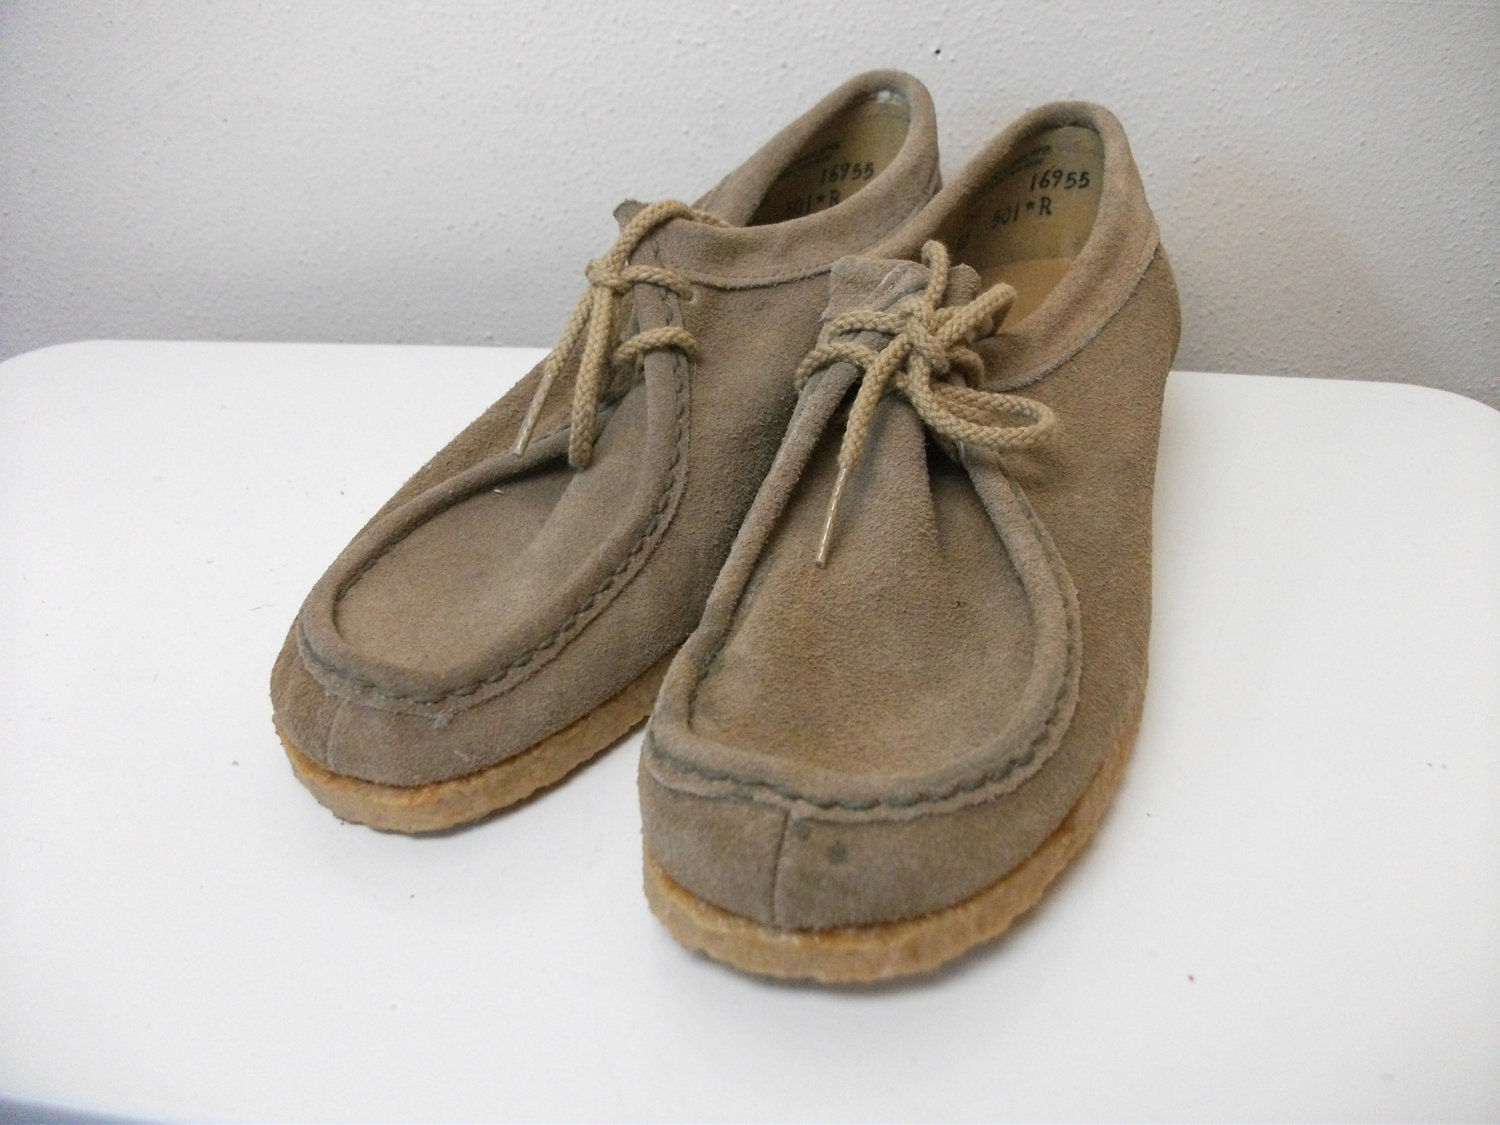 1970s Tan Suede Earth Shoes Size 7.5